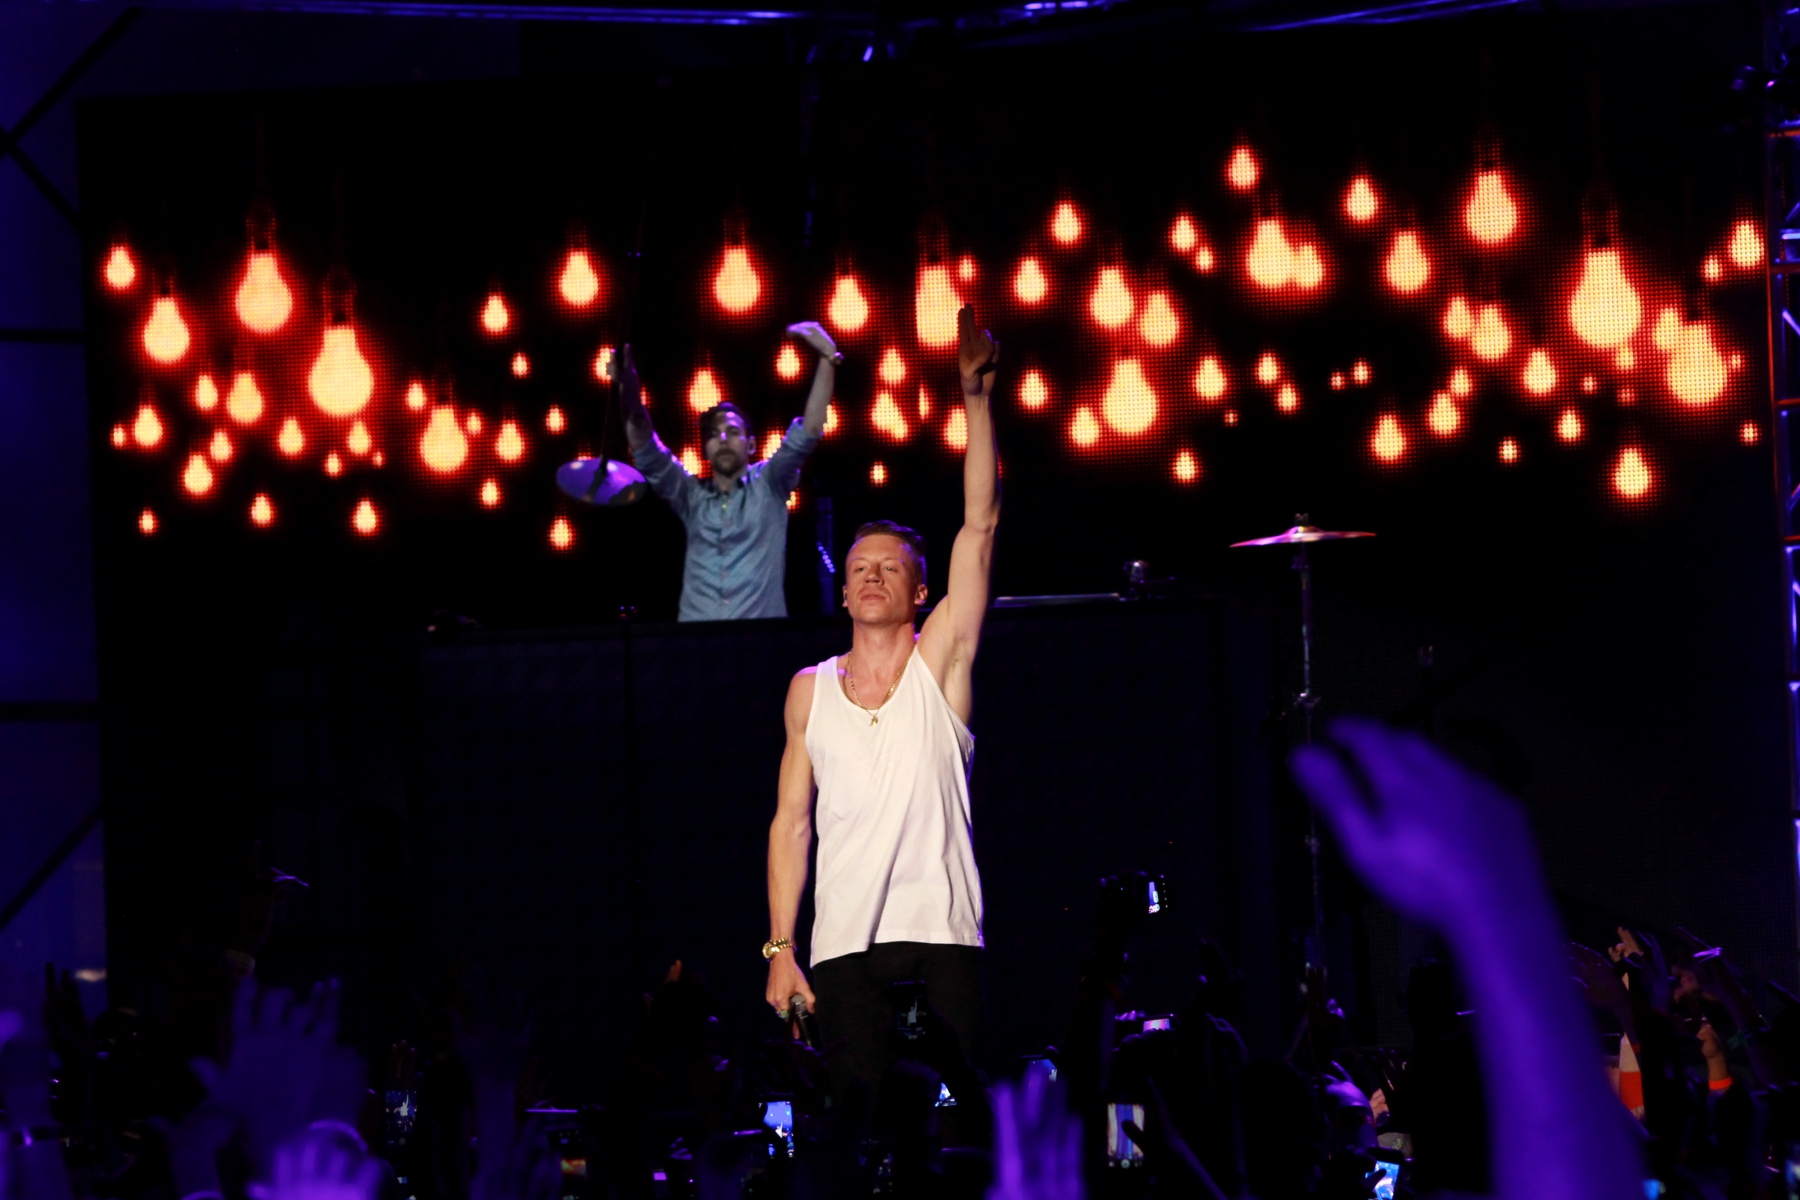 Macklemore Shares Personal Opinions at Pro-Palestine Rally in D.C.